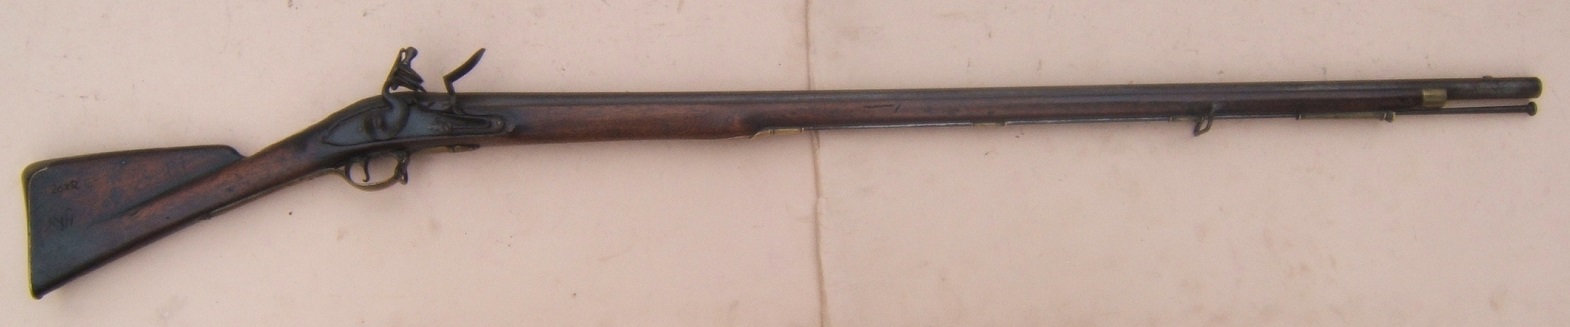 AN EXTREMELY RARE BATTLE OF SARATOGA SURRENDERED REGIMENTALLY MARKED (20th REGIMENT OF FOOT) FIRST MODEL/LONGLAND PATTERN 1756 BROWN BESS MUSKET, dtd. 1760 (Ex. GEORGE C. NEUMANN COLLECTION) view 1